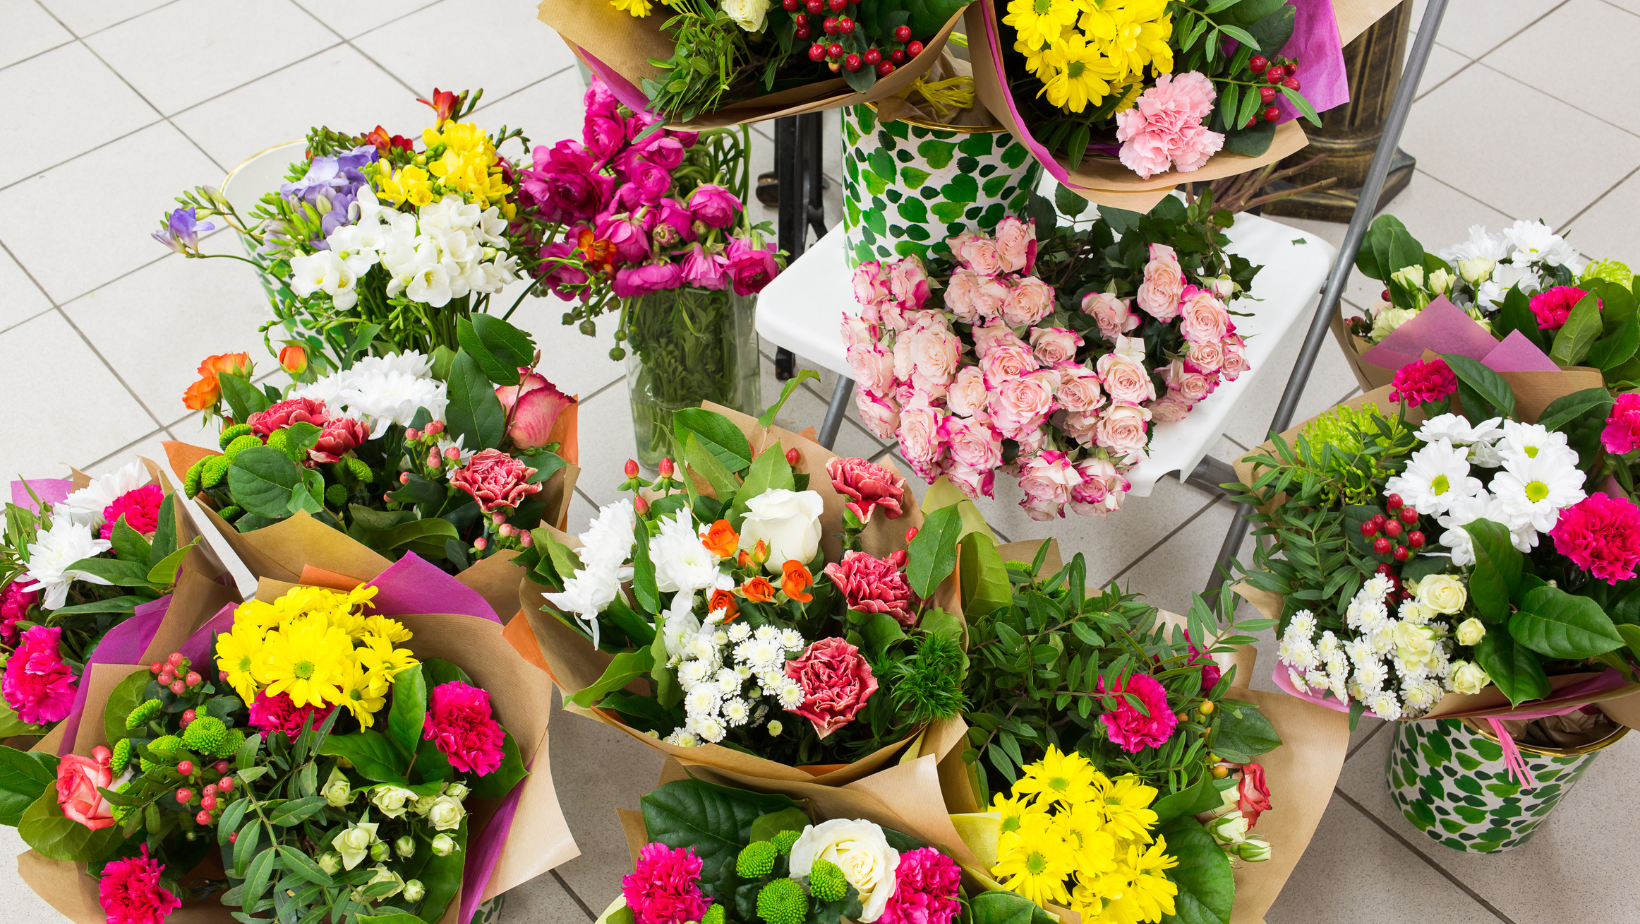 Wedding flower arrangements, know the meaning of flower to select the right flowers